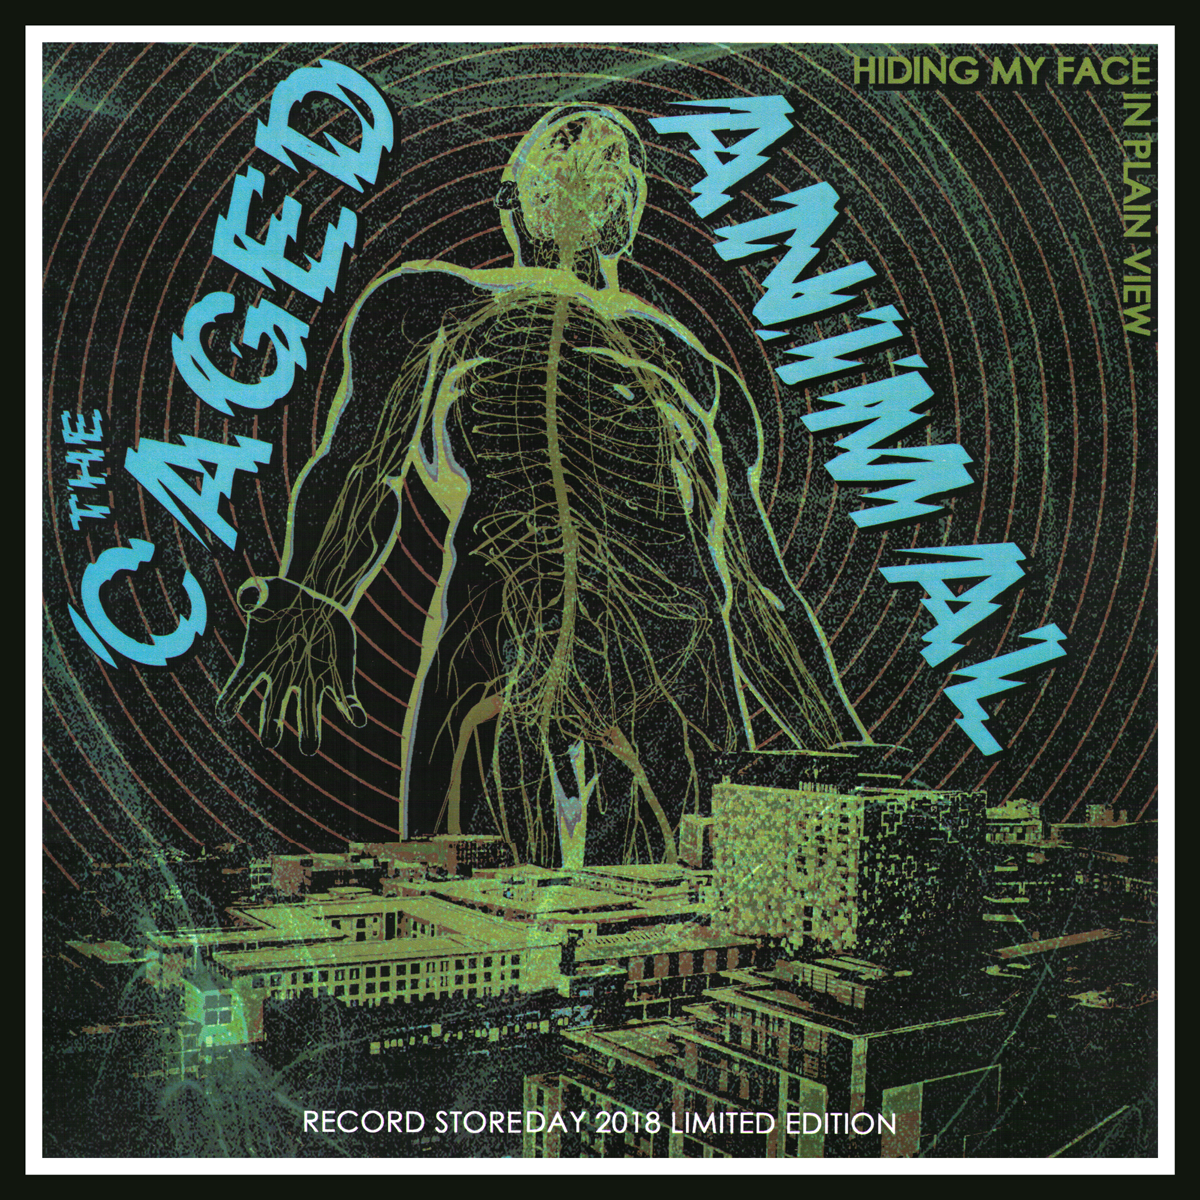 Caged Animal- Hiding My Face In Plain View LP ~RAREST COVER LTD TO 20 NUMBERED COPIES!